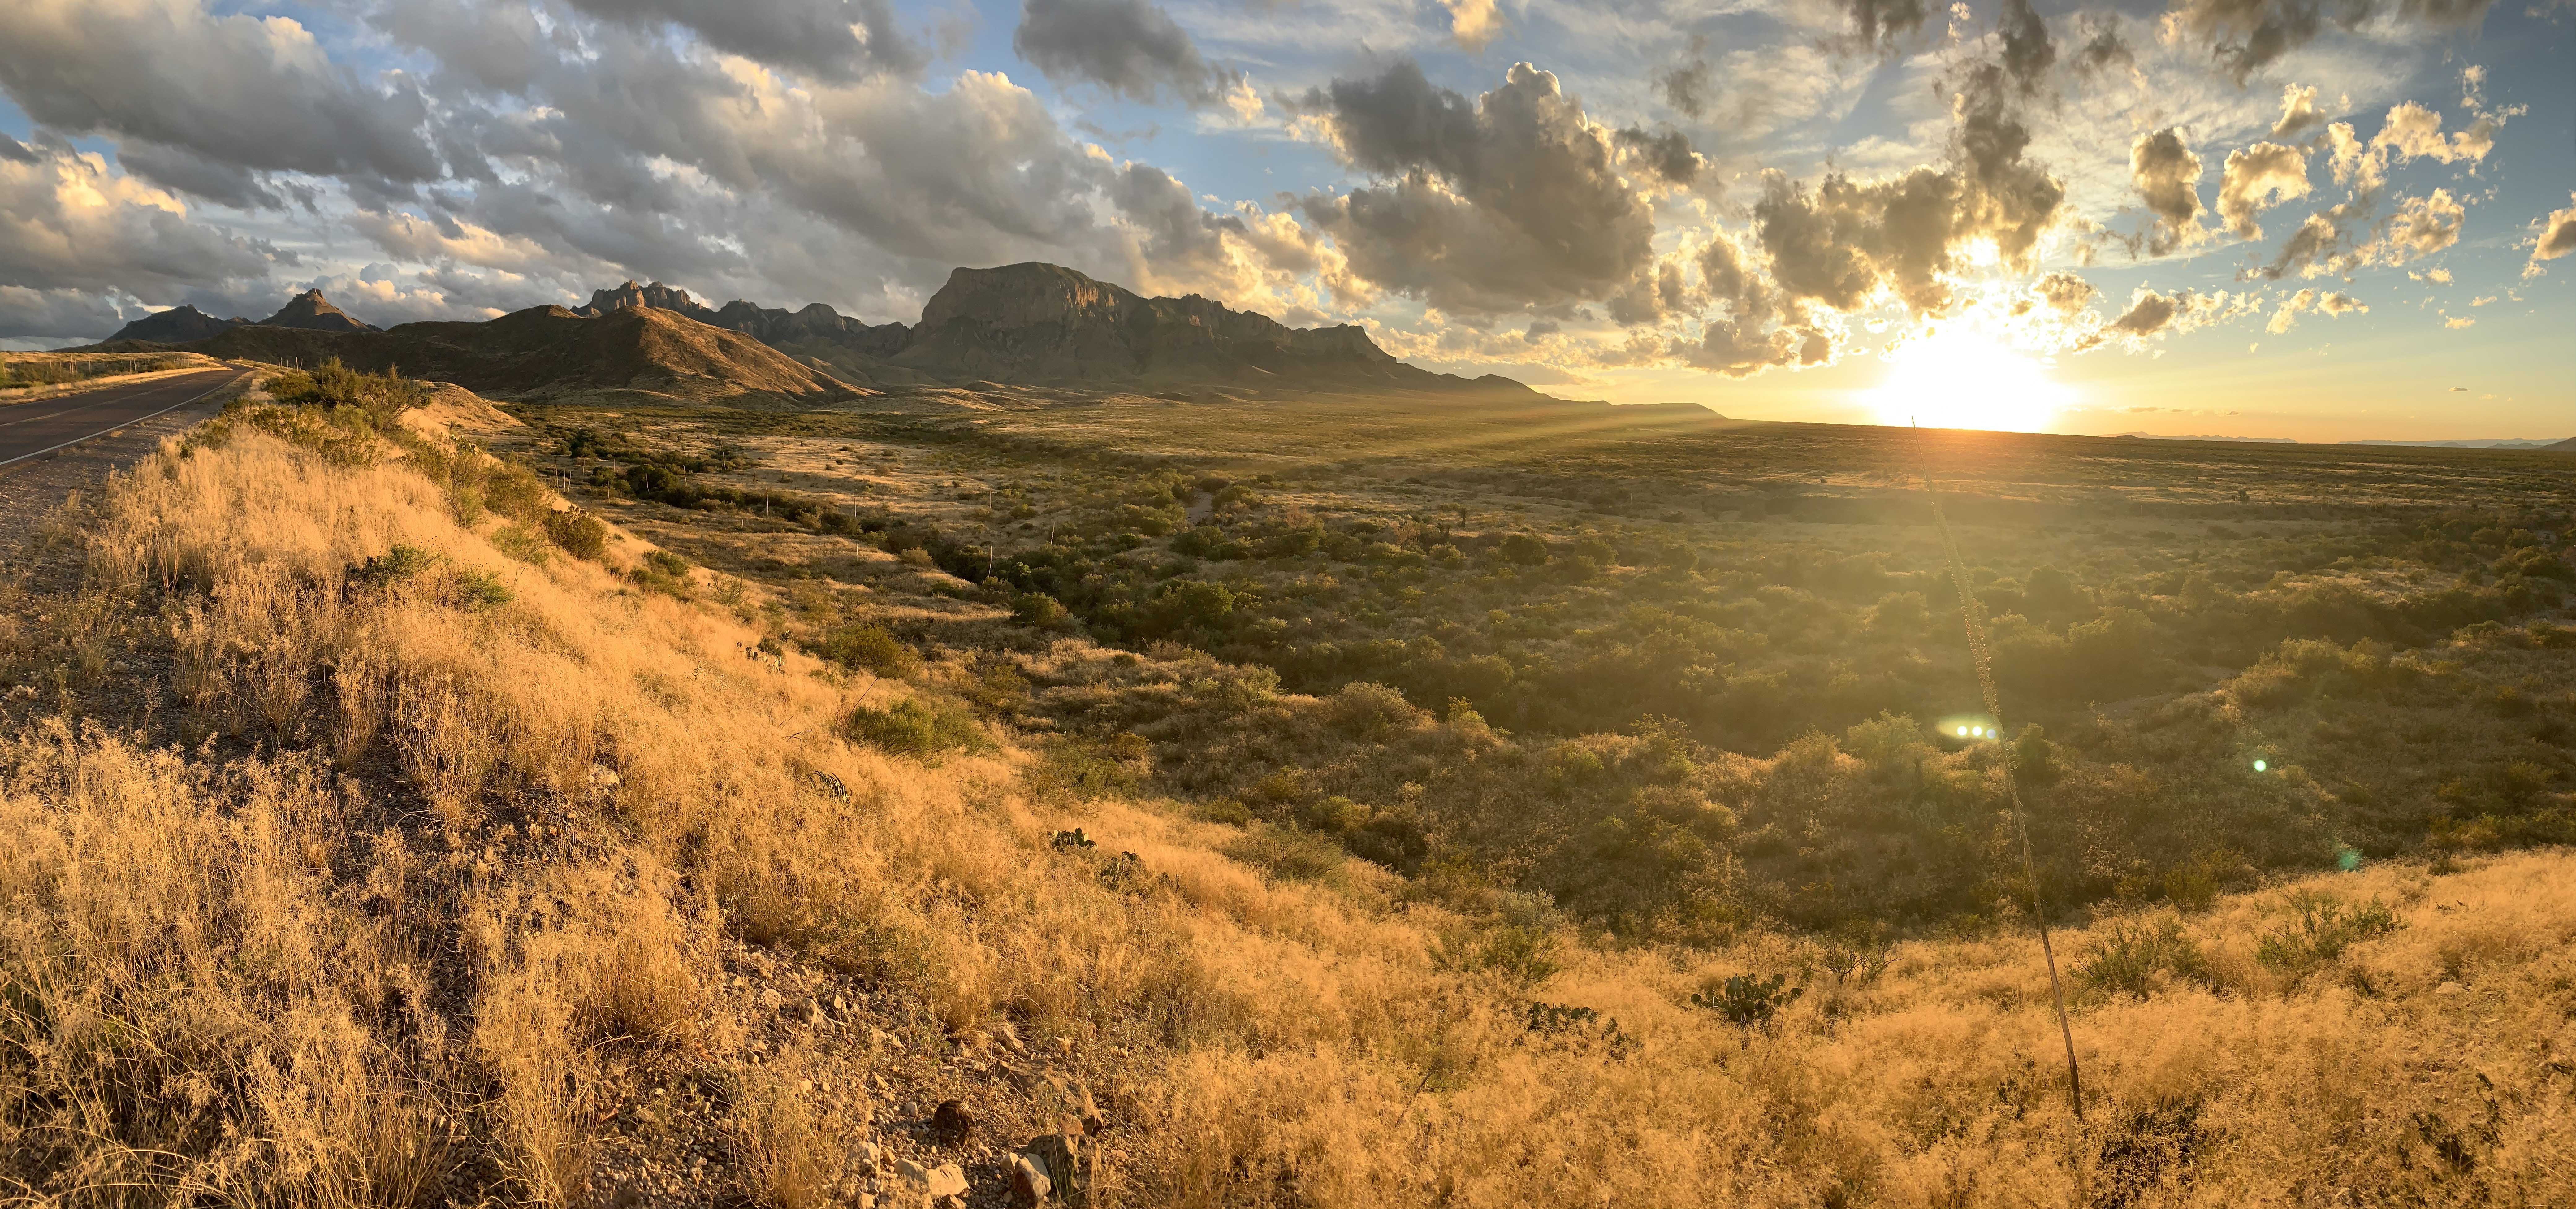 Shrubs and tall grass meet towering rocky mountains as the sun rises along a West Texas road.